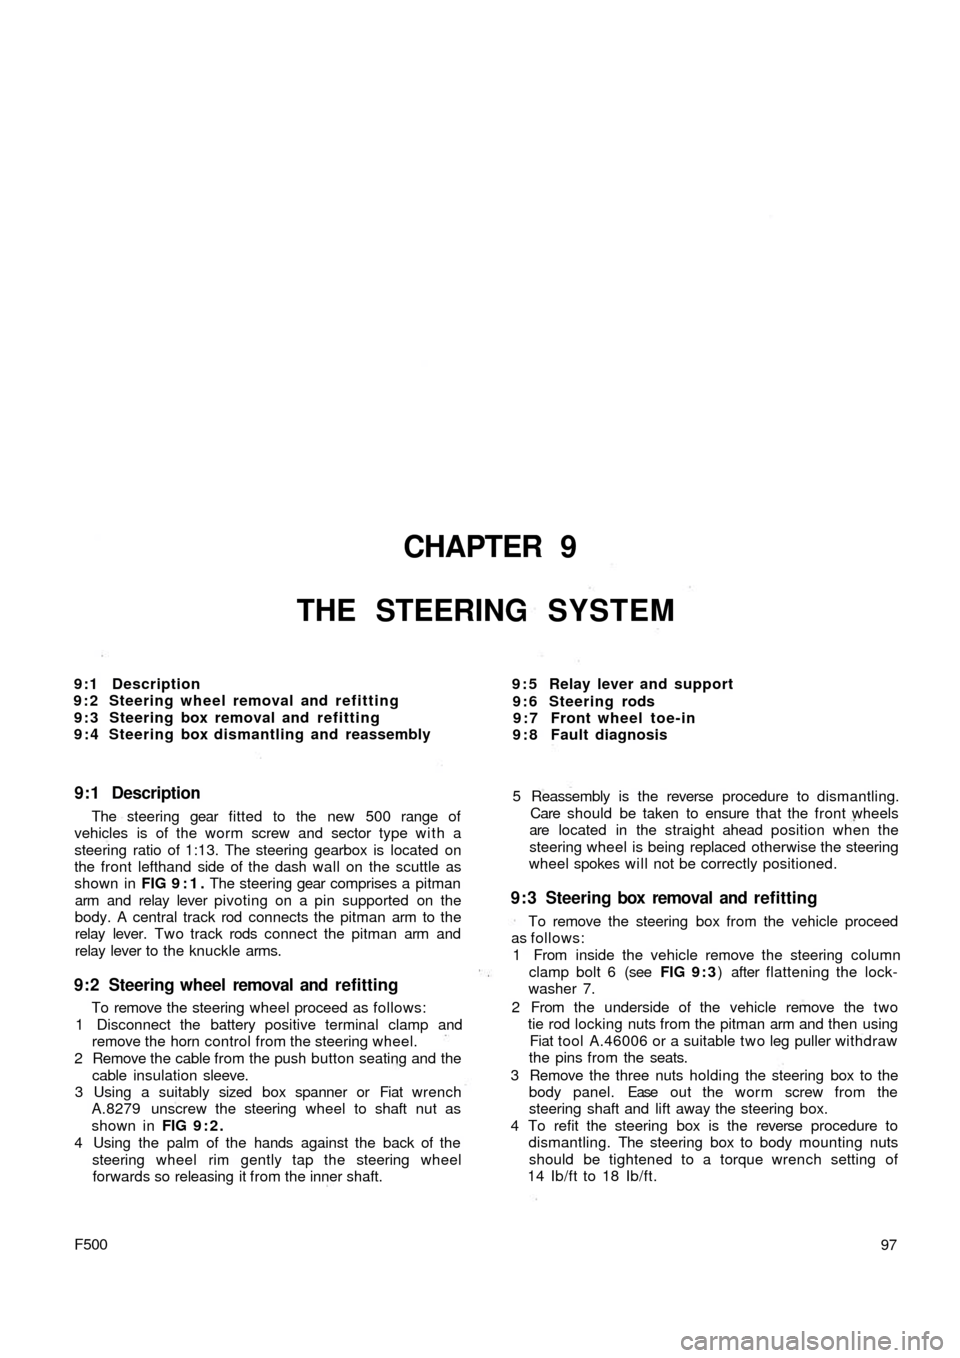 FIAT 500 1960 1.G Workshop Manual CHAPTER 9
THE STEERING SYSTEM
9 : 5 Relay lever and support
9 : 6 Steering rods
9 : 7 Front wheel toe-in
9 : 8 Fault diagnosis 9:1 Description
9 : 2 Steering wheel removal and refitting
9 : 3 Steering